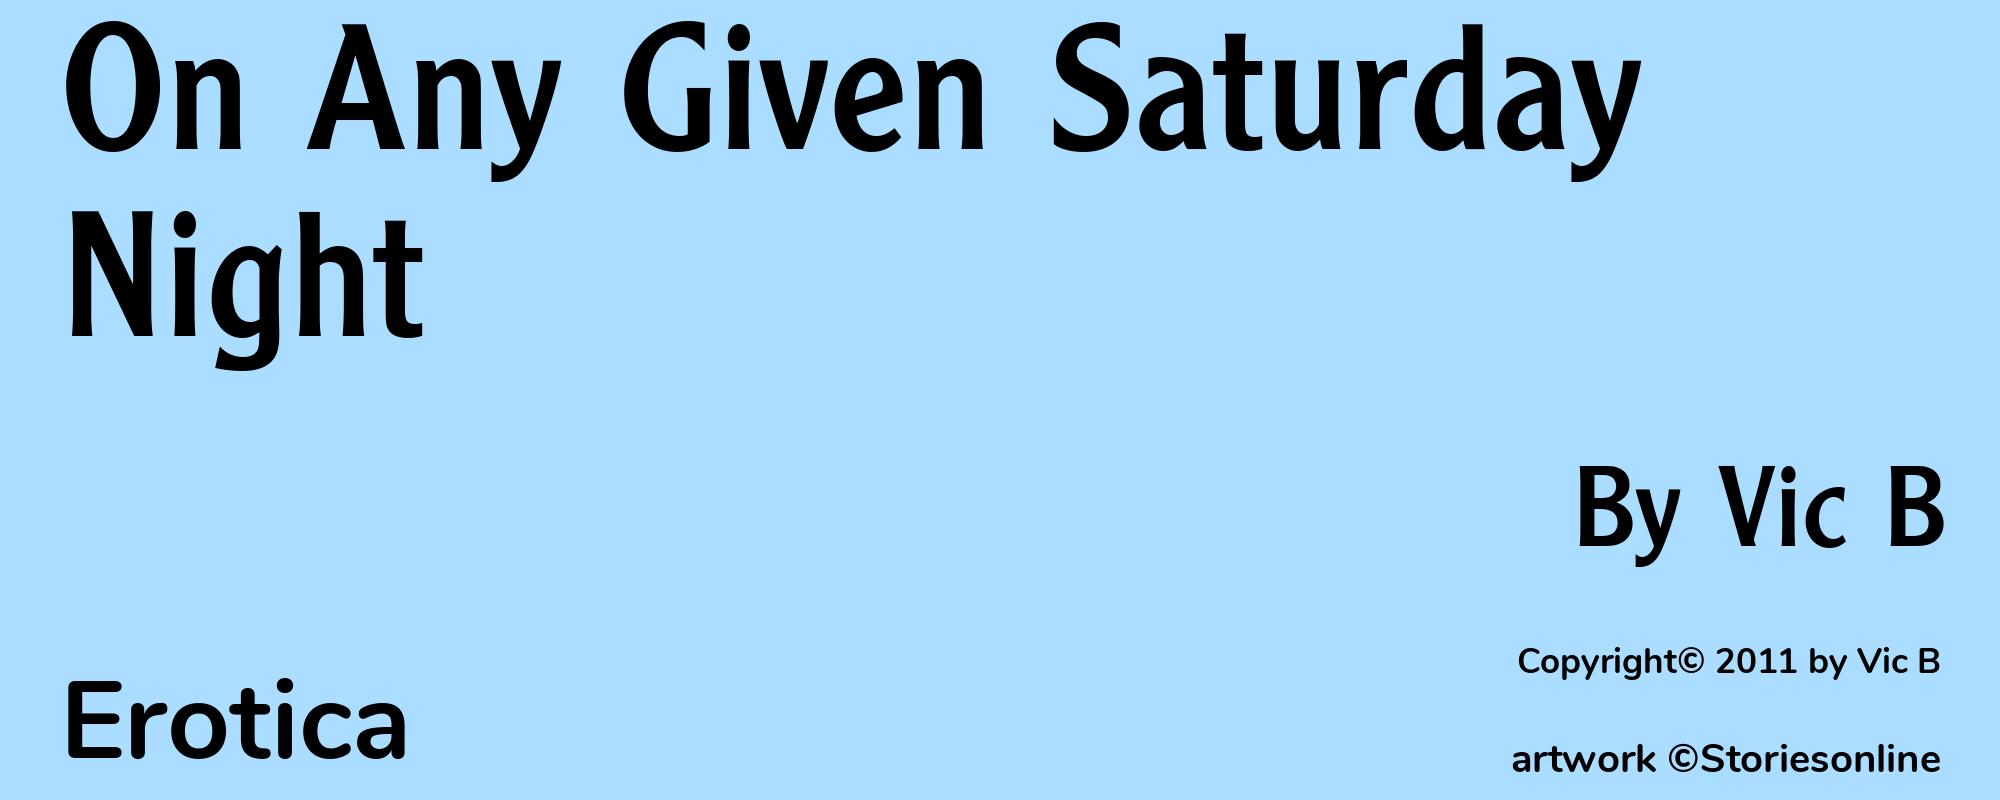 On Any Given Saturday Night - Cover